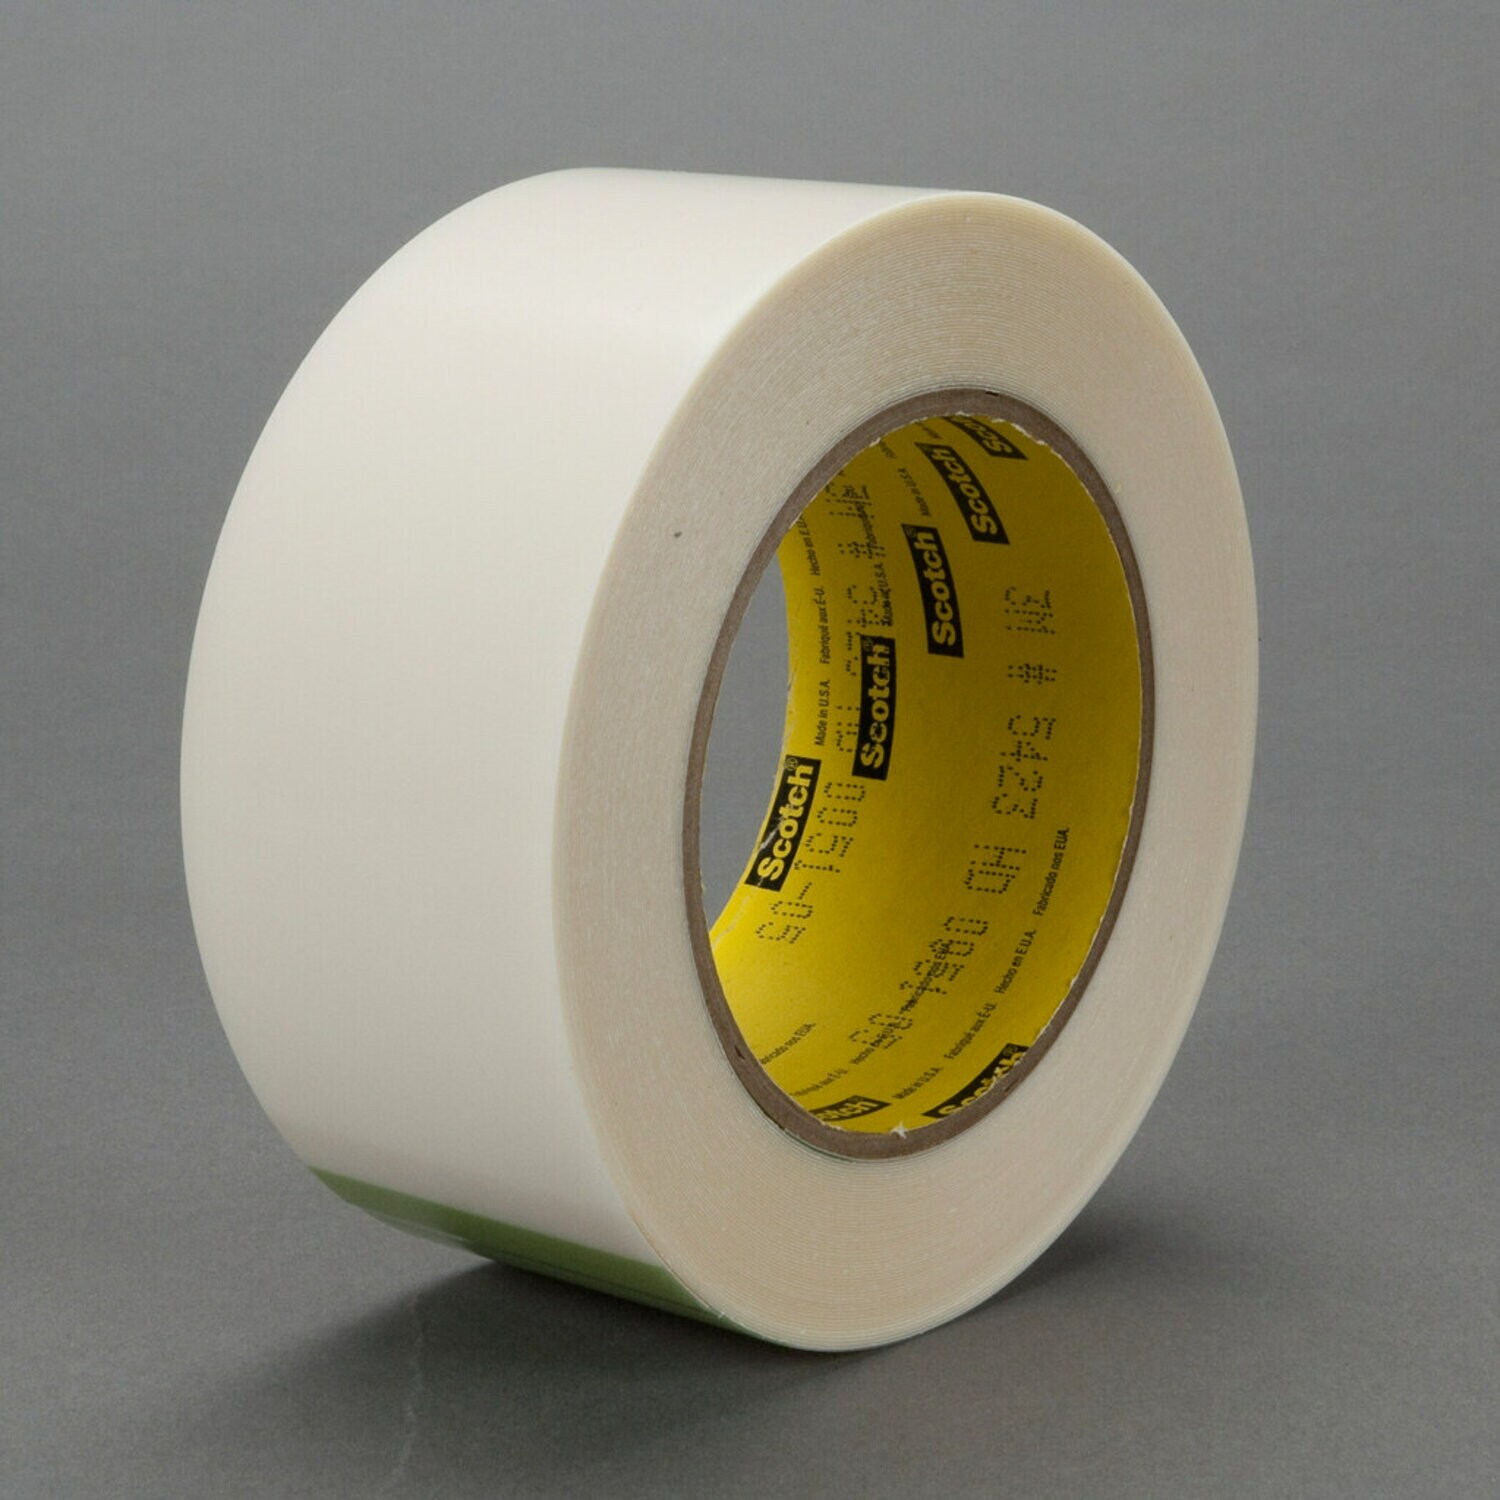 3M Clear 1522 Tape 1 x 36 Yard = Double Side Adhesive